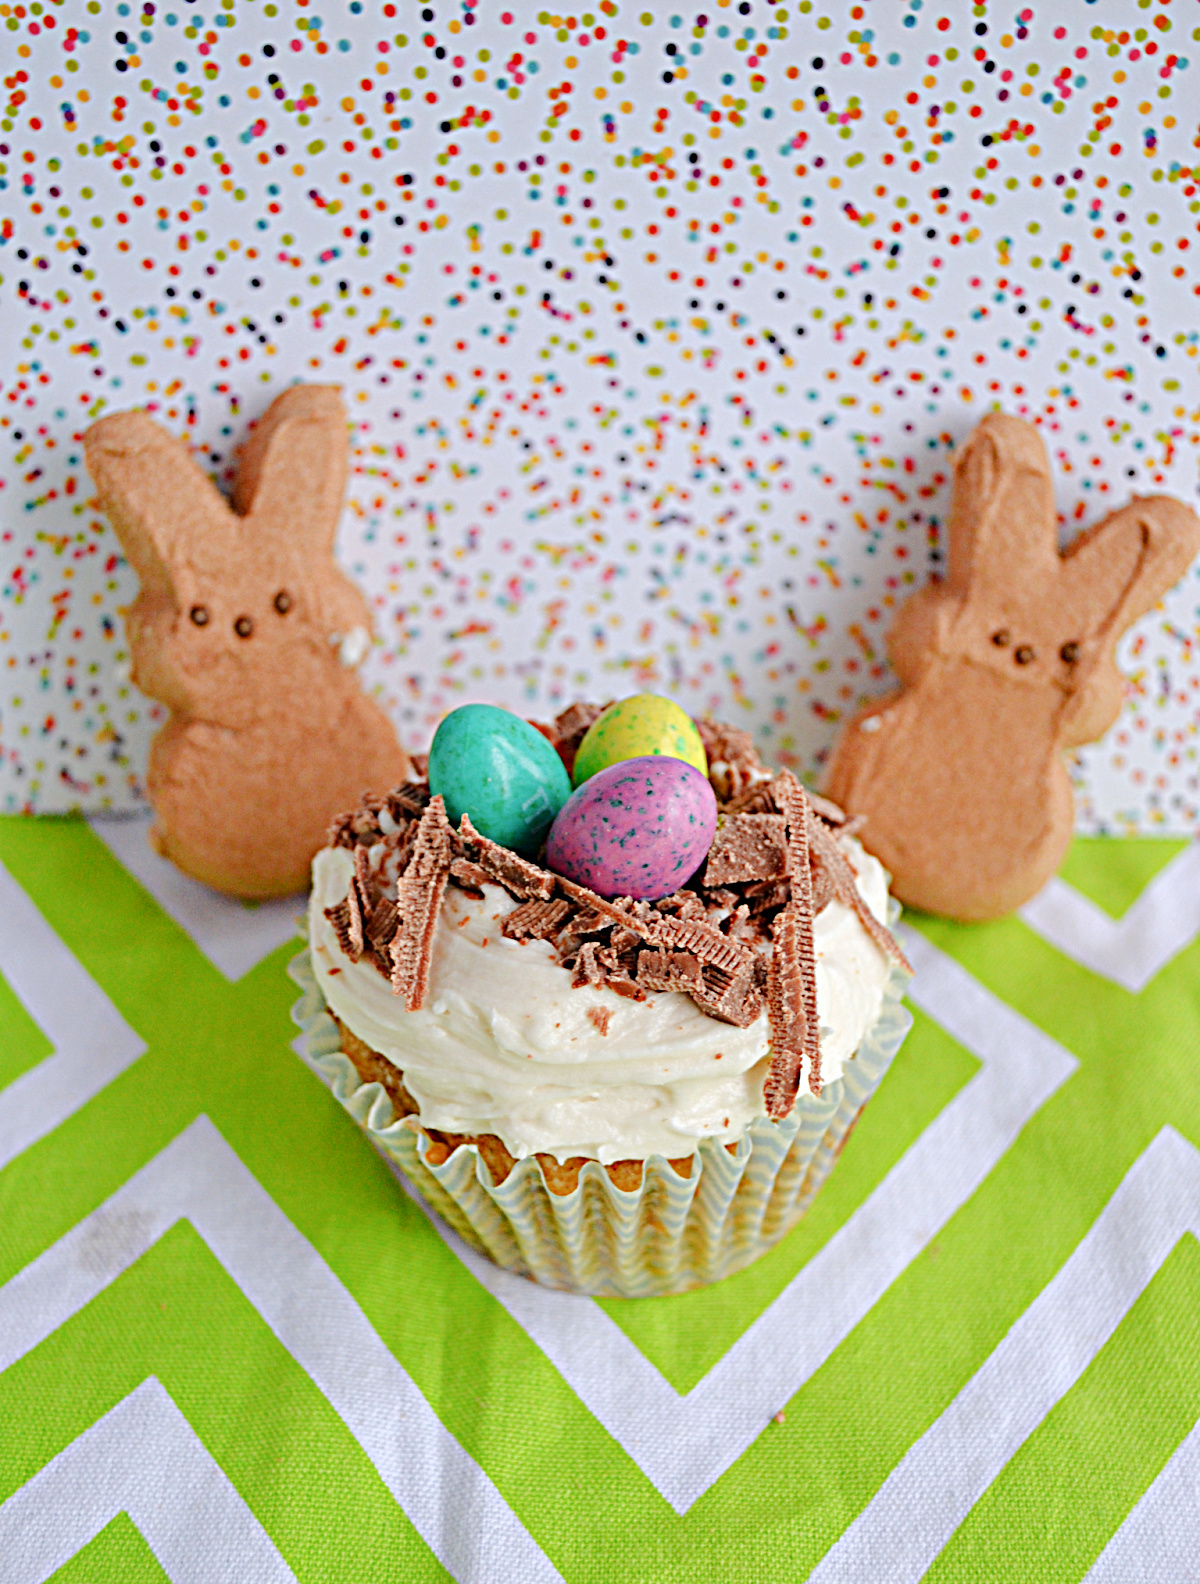 A cupcake with a chocolate bird's nest and candy eggs on top and two Peeps Bunnies behind the cupcake.